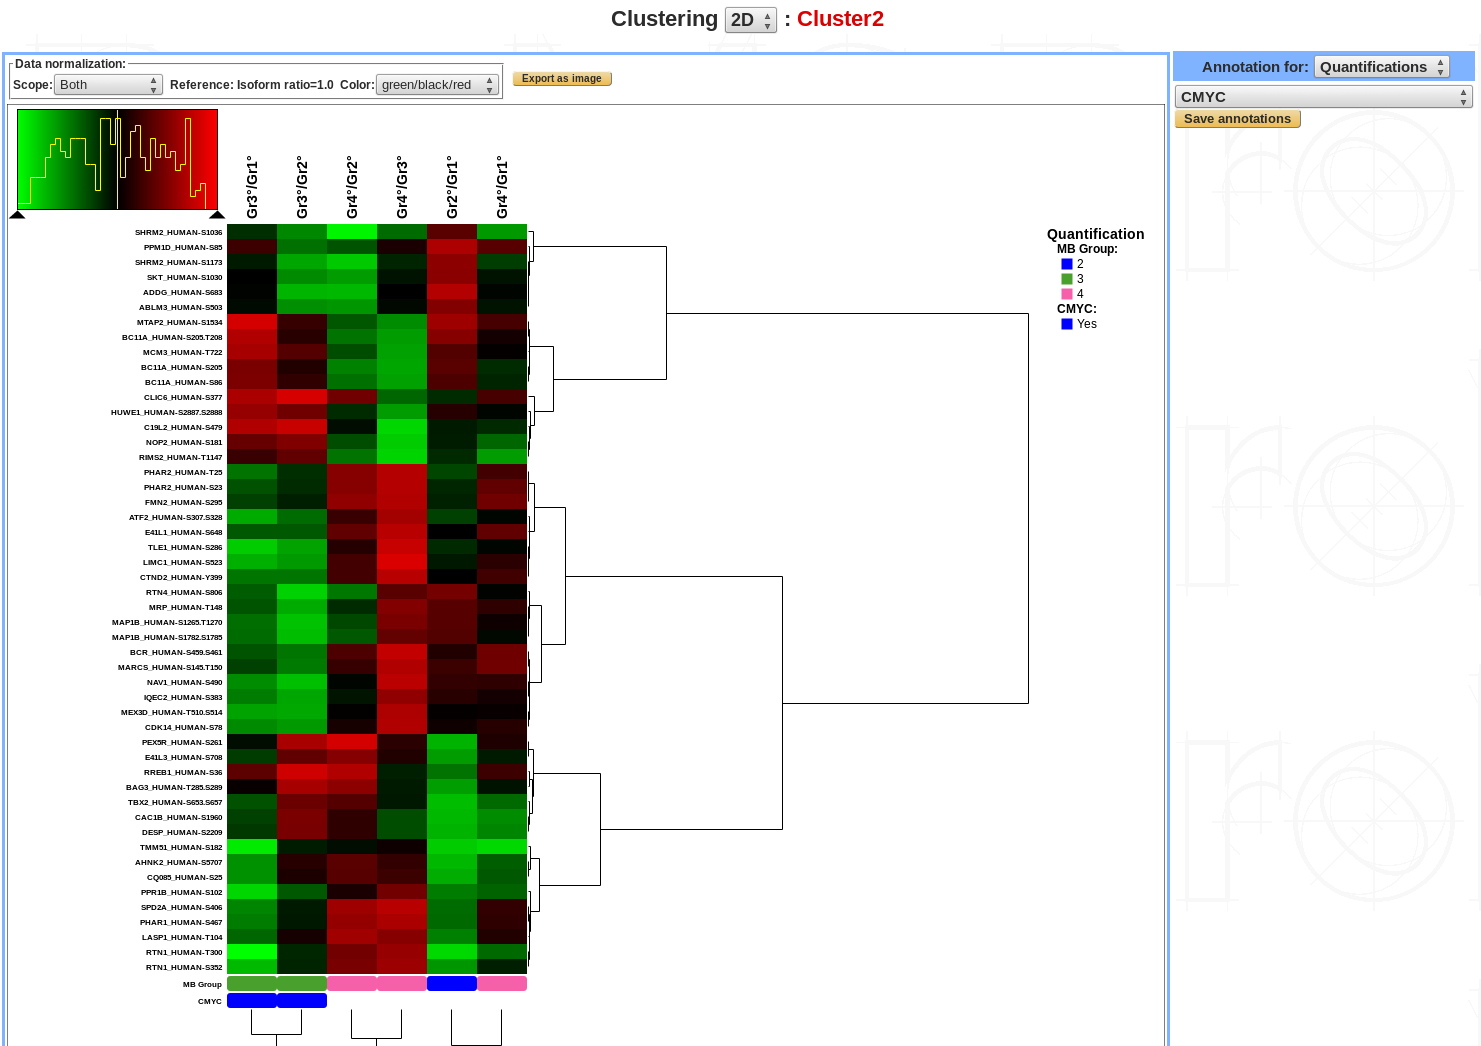 ../../_images/exploratory_analysis_clustering.png